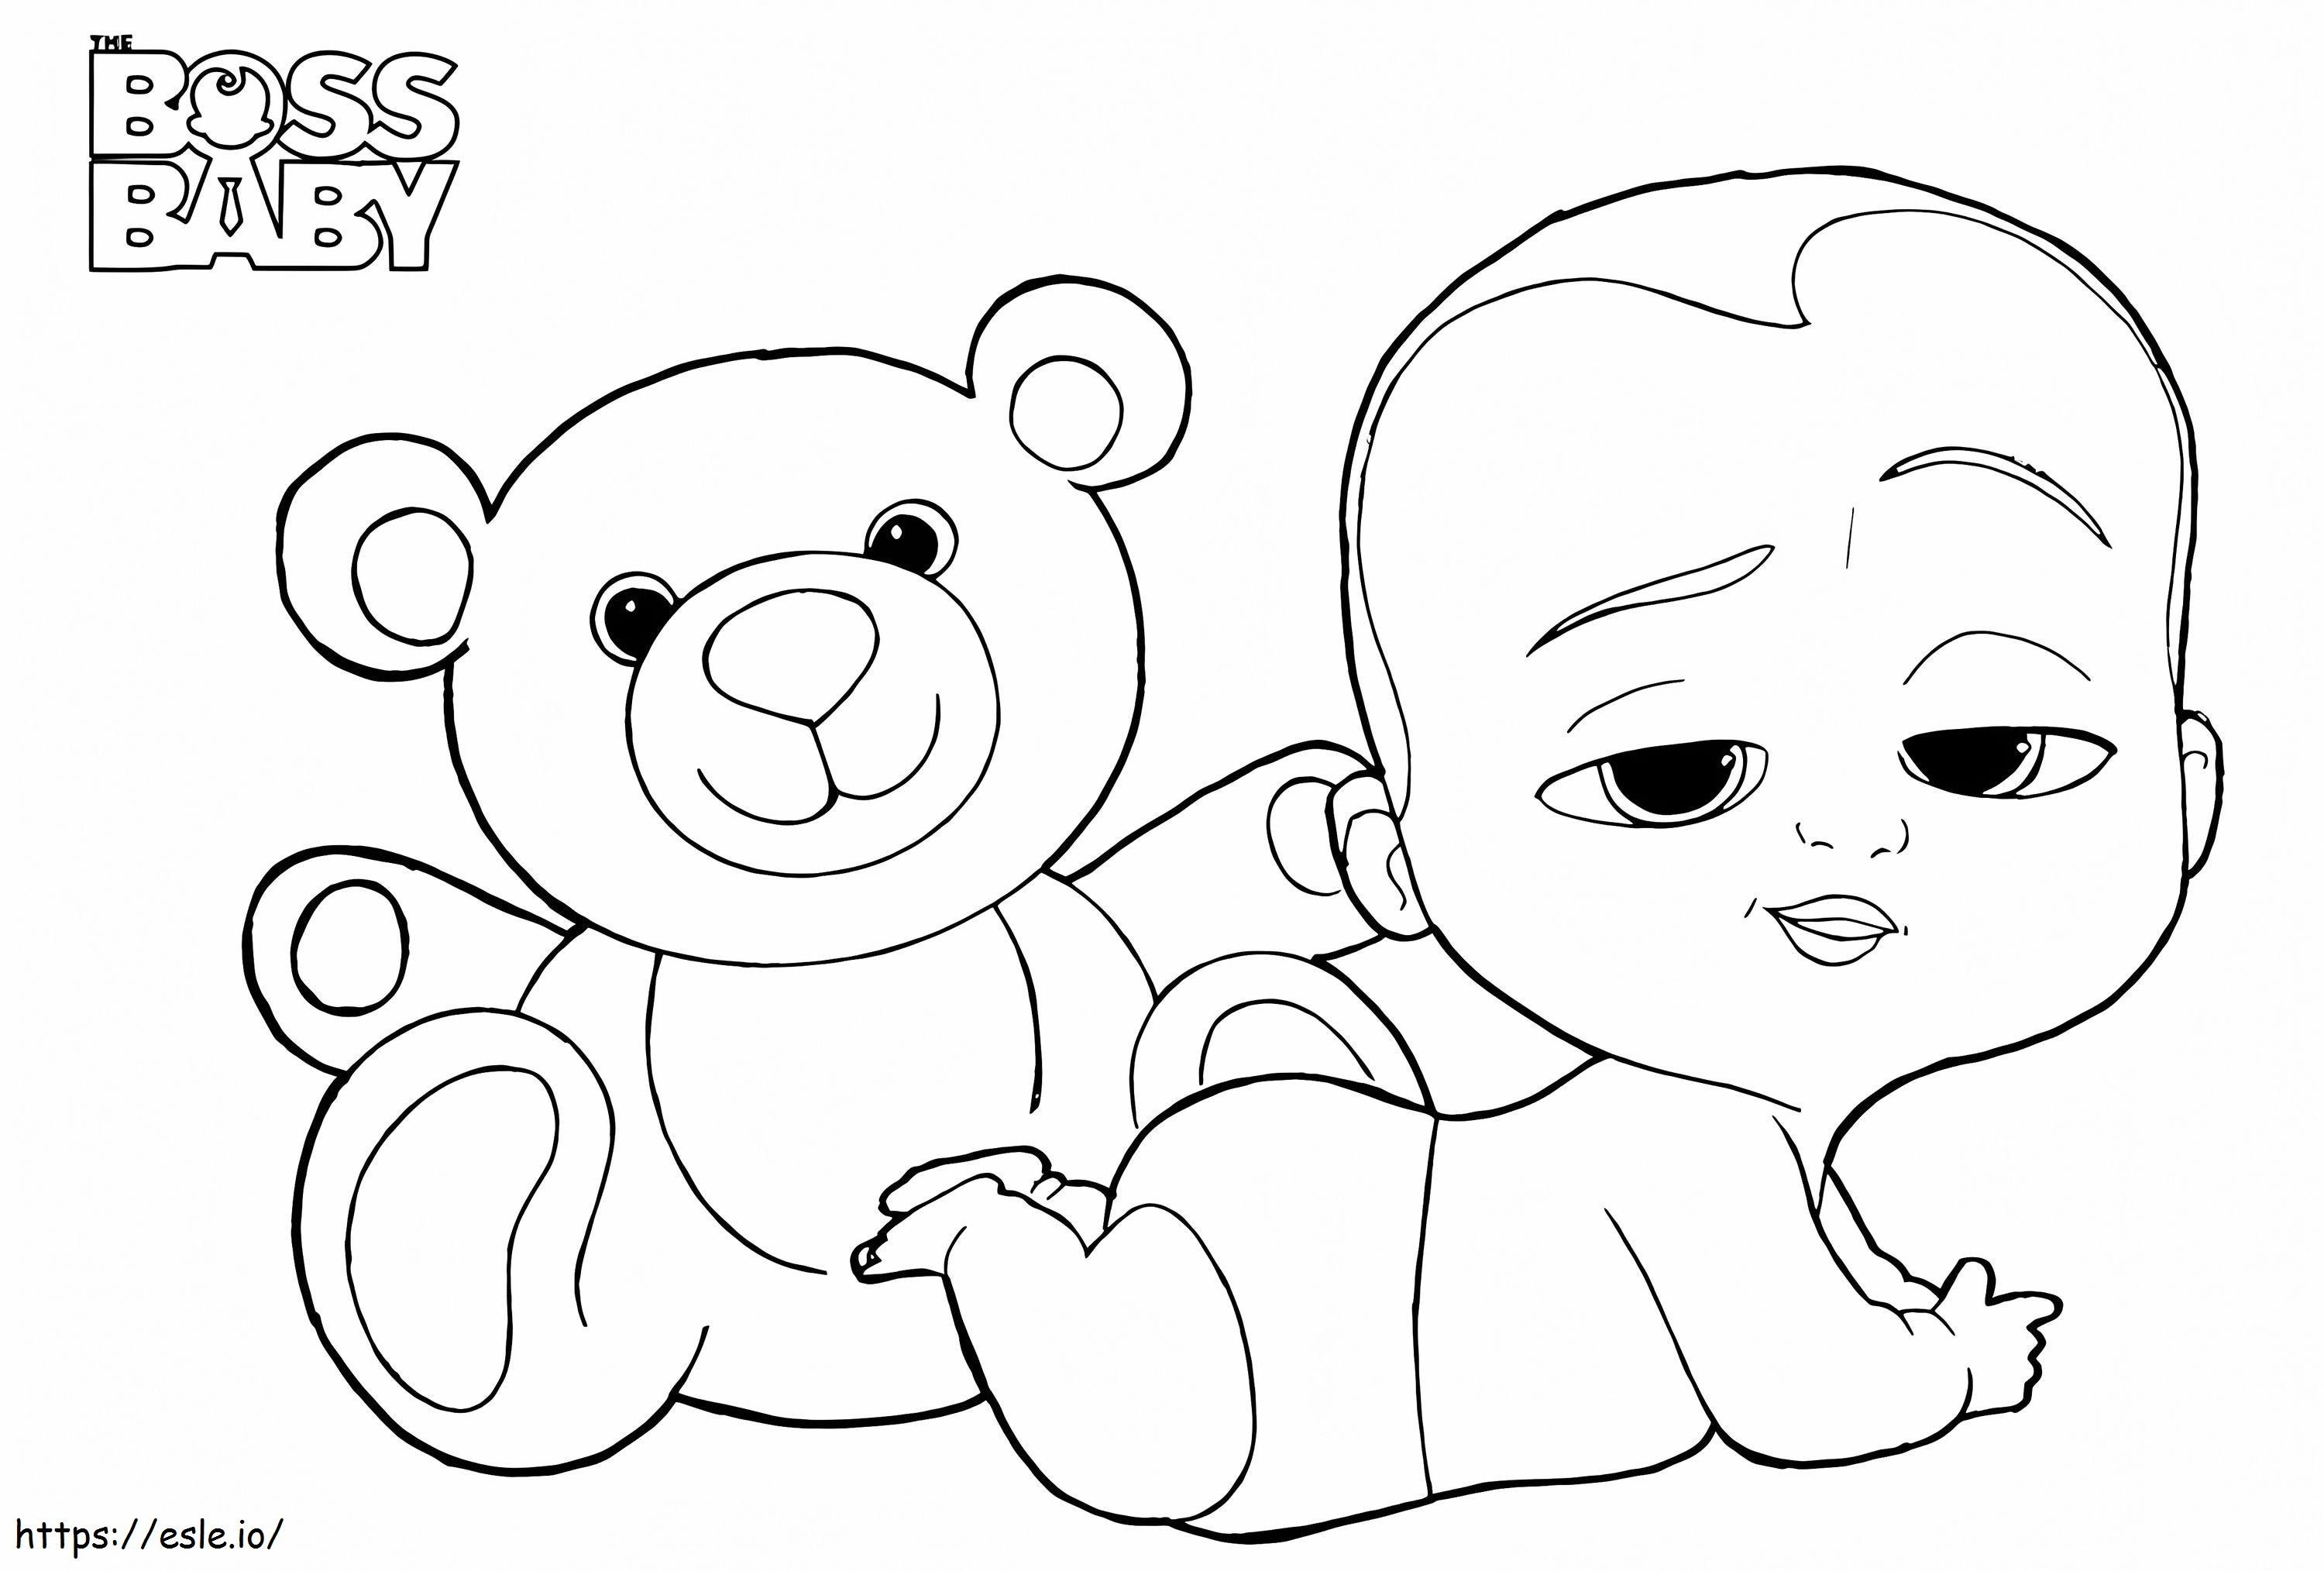 Boss Baby And Teddy A4 coloring page